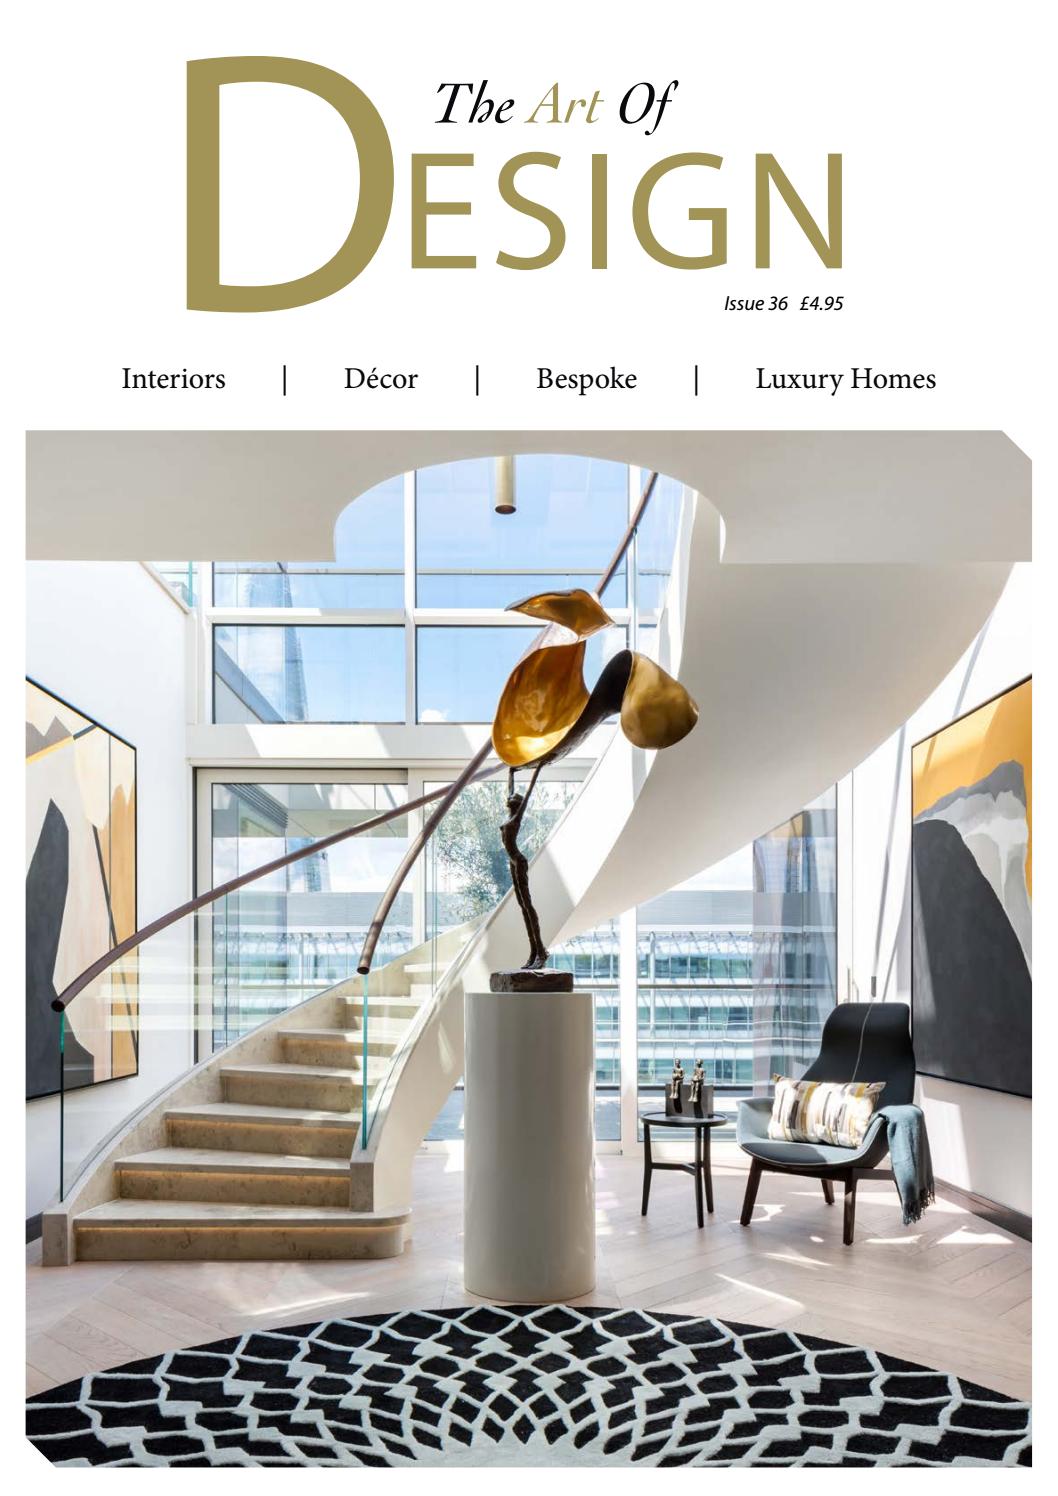 Fireplace Plus San Marcos Best Of the Art Of Design issue 36 2019 by Mh Media Global issuu